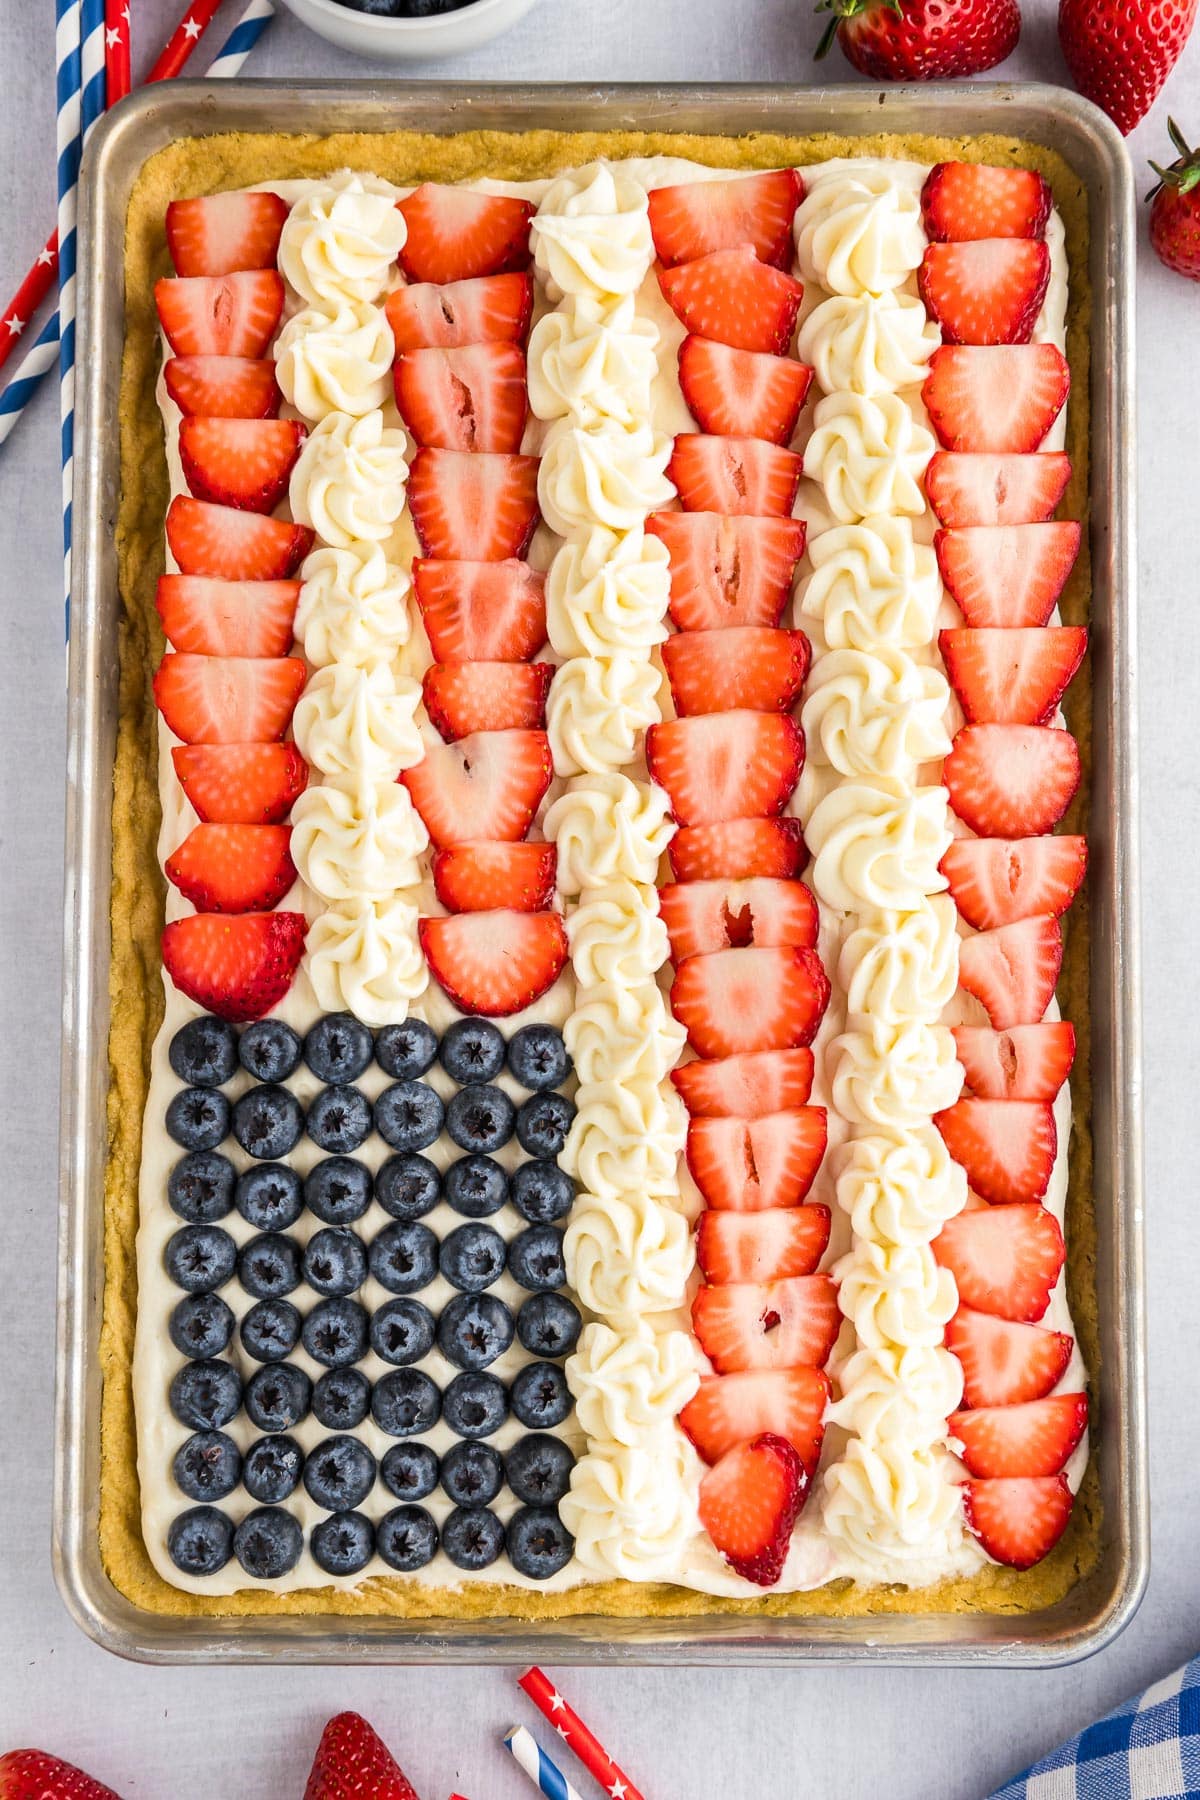 A large flag fruit pizza cookie resembling the American flag with rows of sliced strawberries, blueberries, and dollops of white frosting on a baking pan.